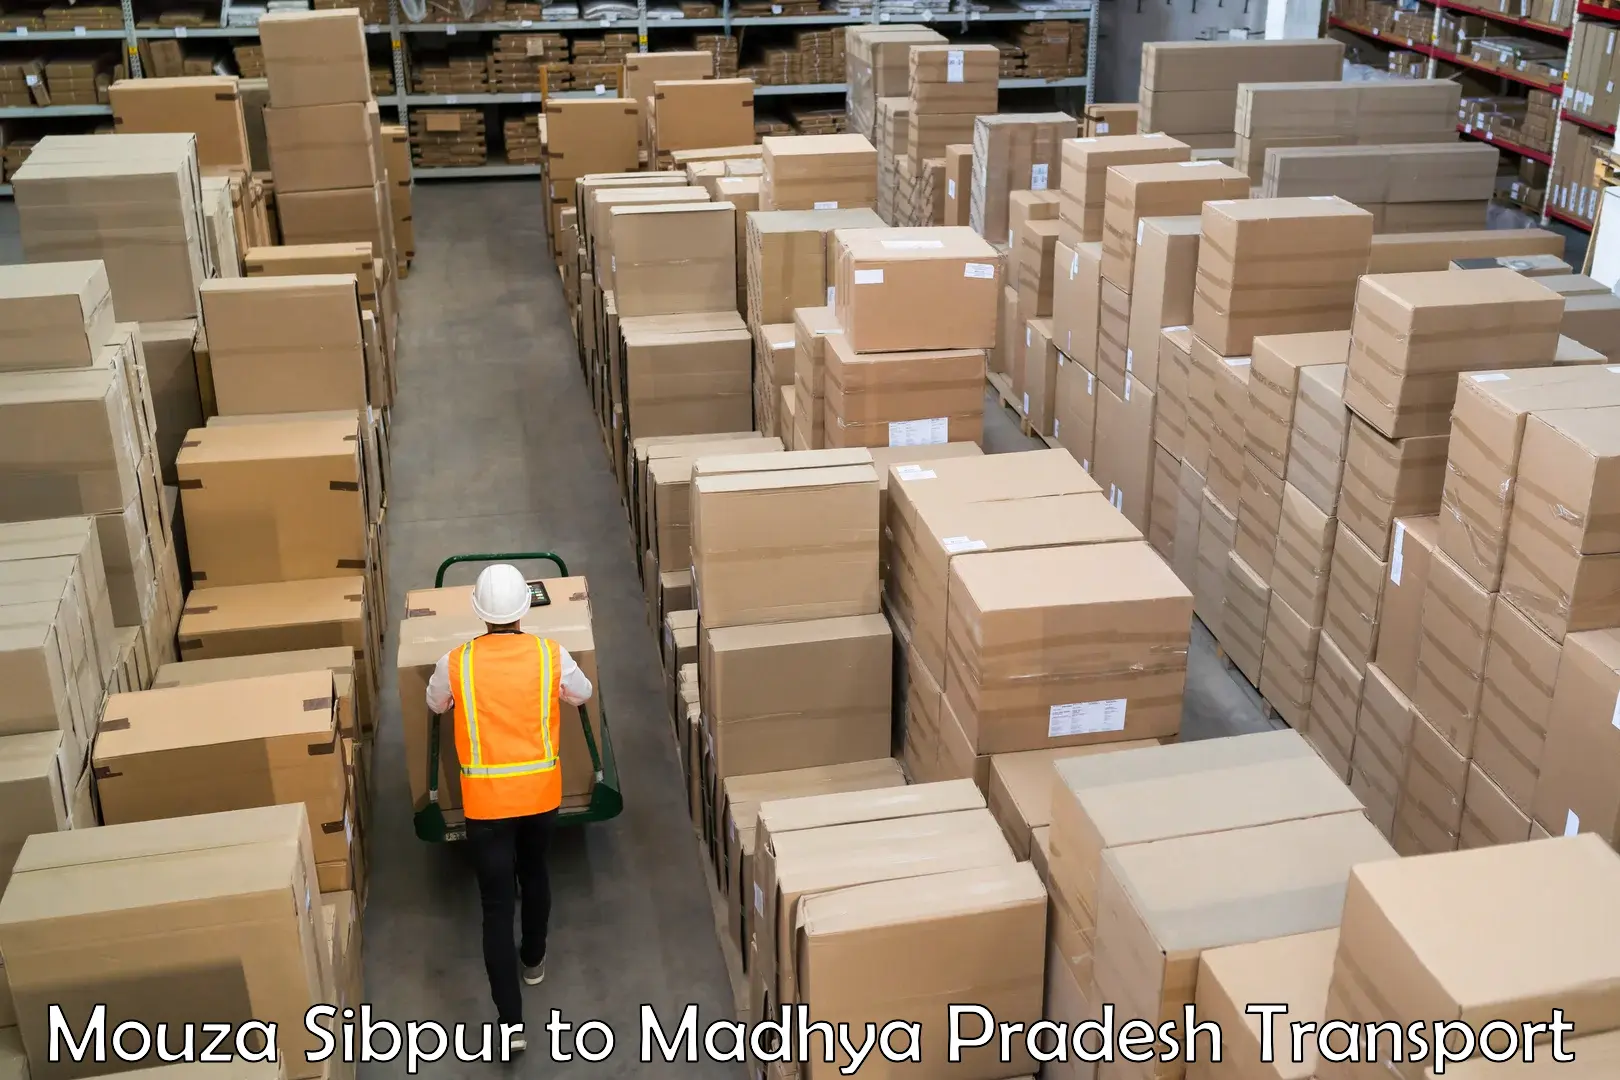 Luggage transport services Mouza Sibpur to Madwas